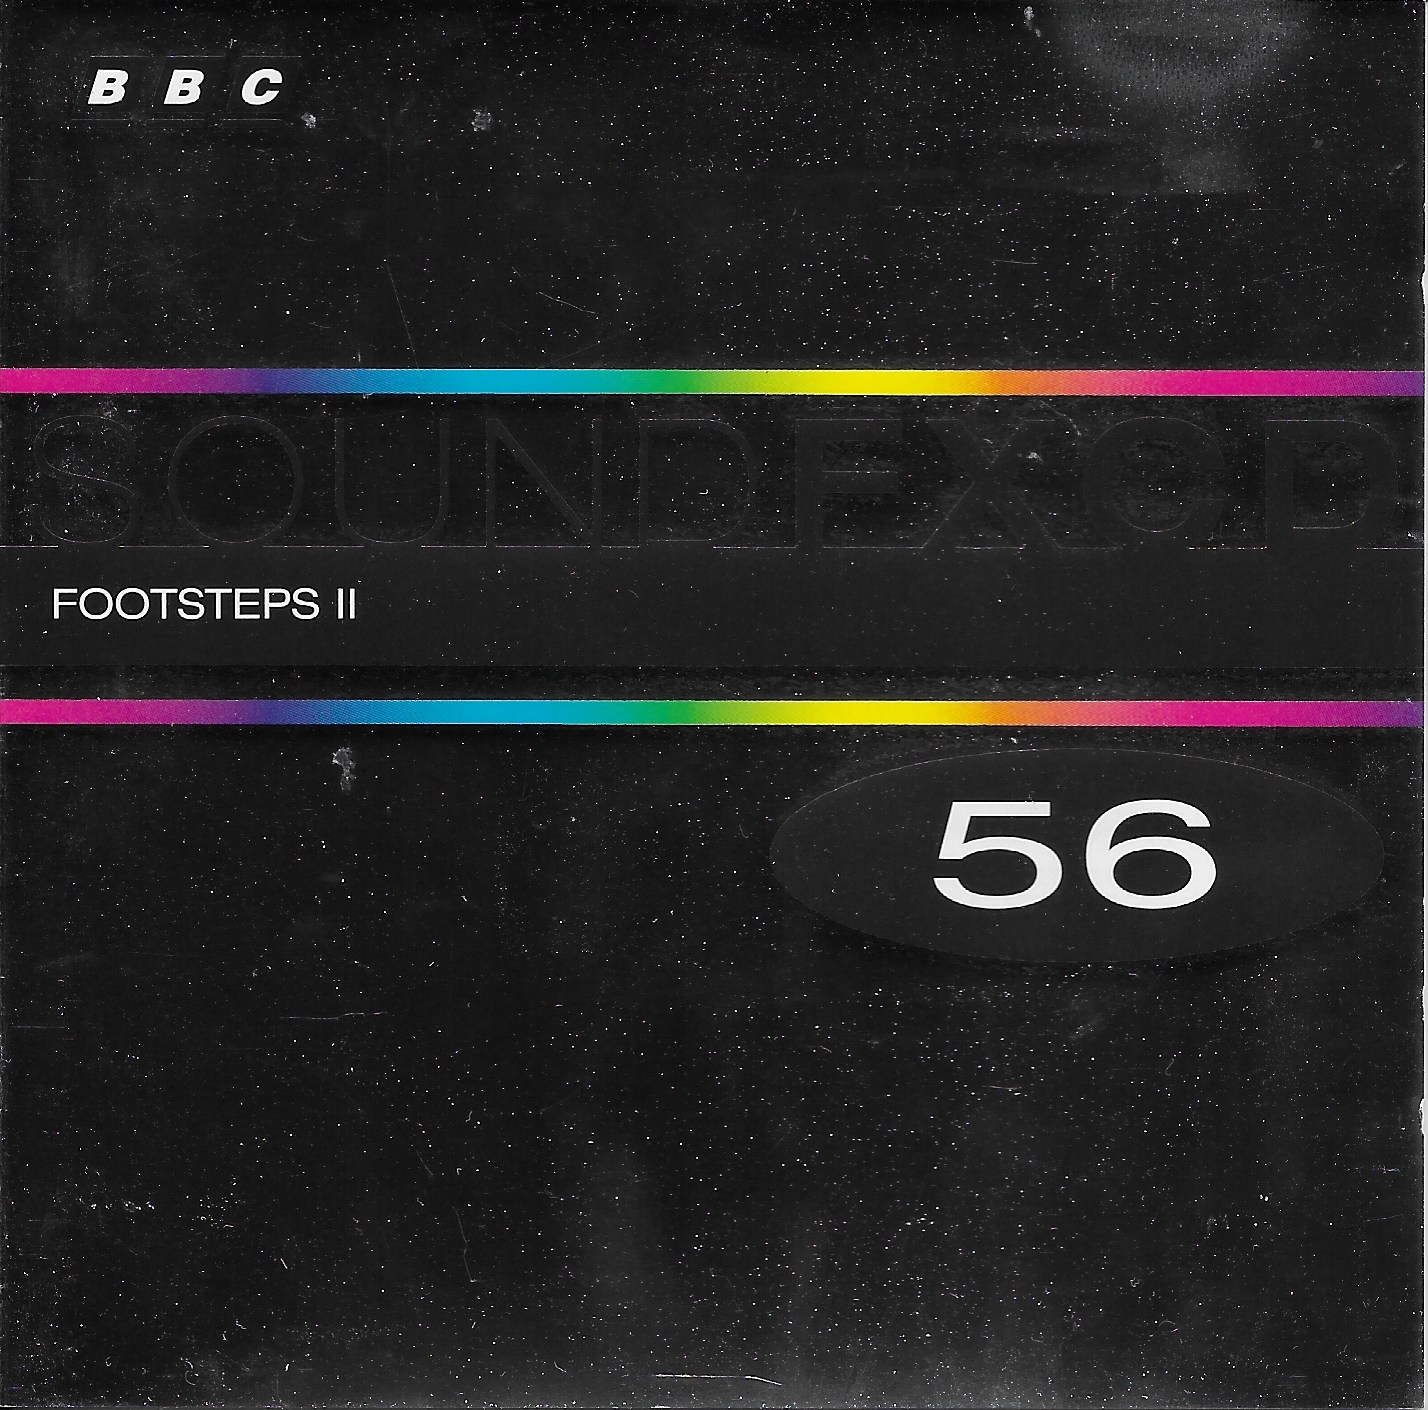 Picture of BBCCD SFX056 Footsteps II by artist Various from the BBC records and Tapes library